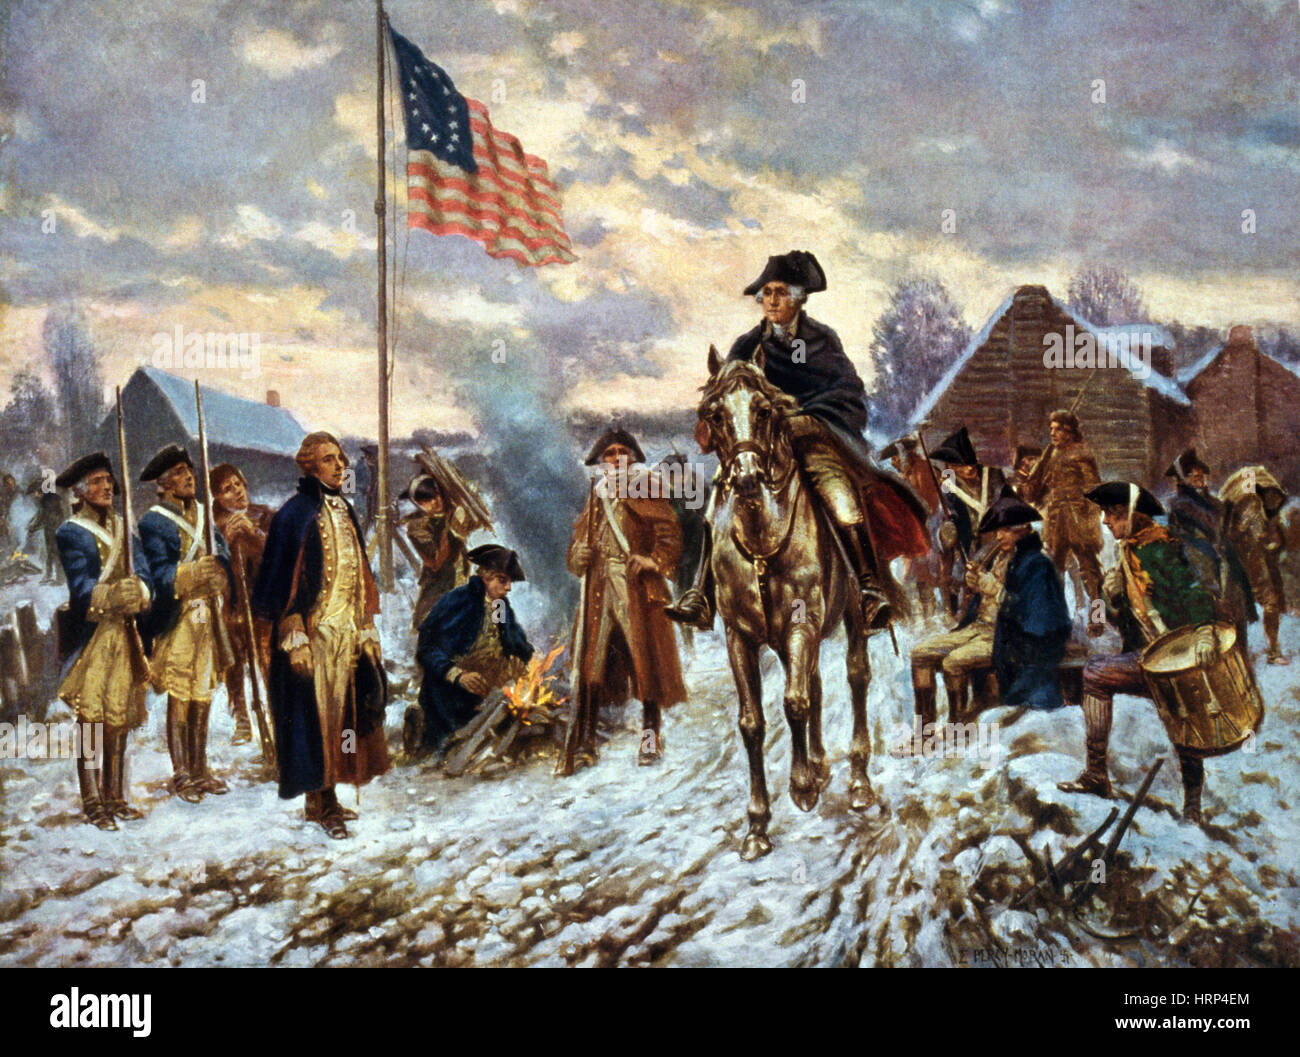 George Washington at Valley Forge, 1777-78 Stock Photo